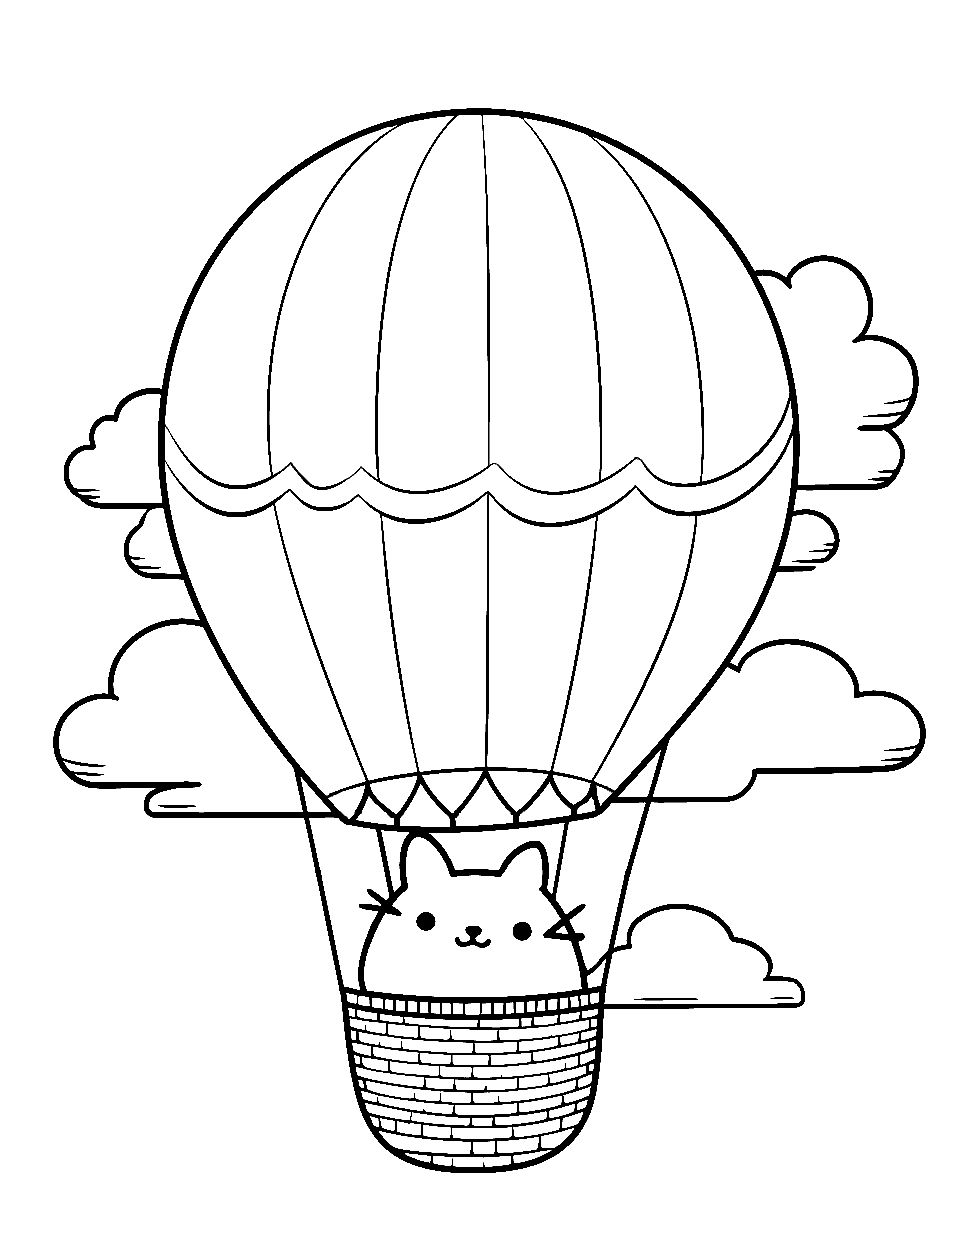 Hot Air Balloon Ride Coloring Page - Pusheen looking out from a hot air balloon.